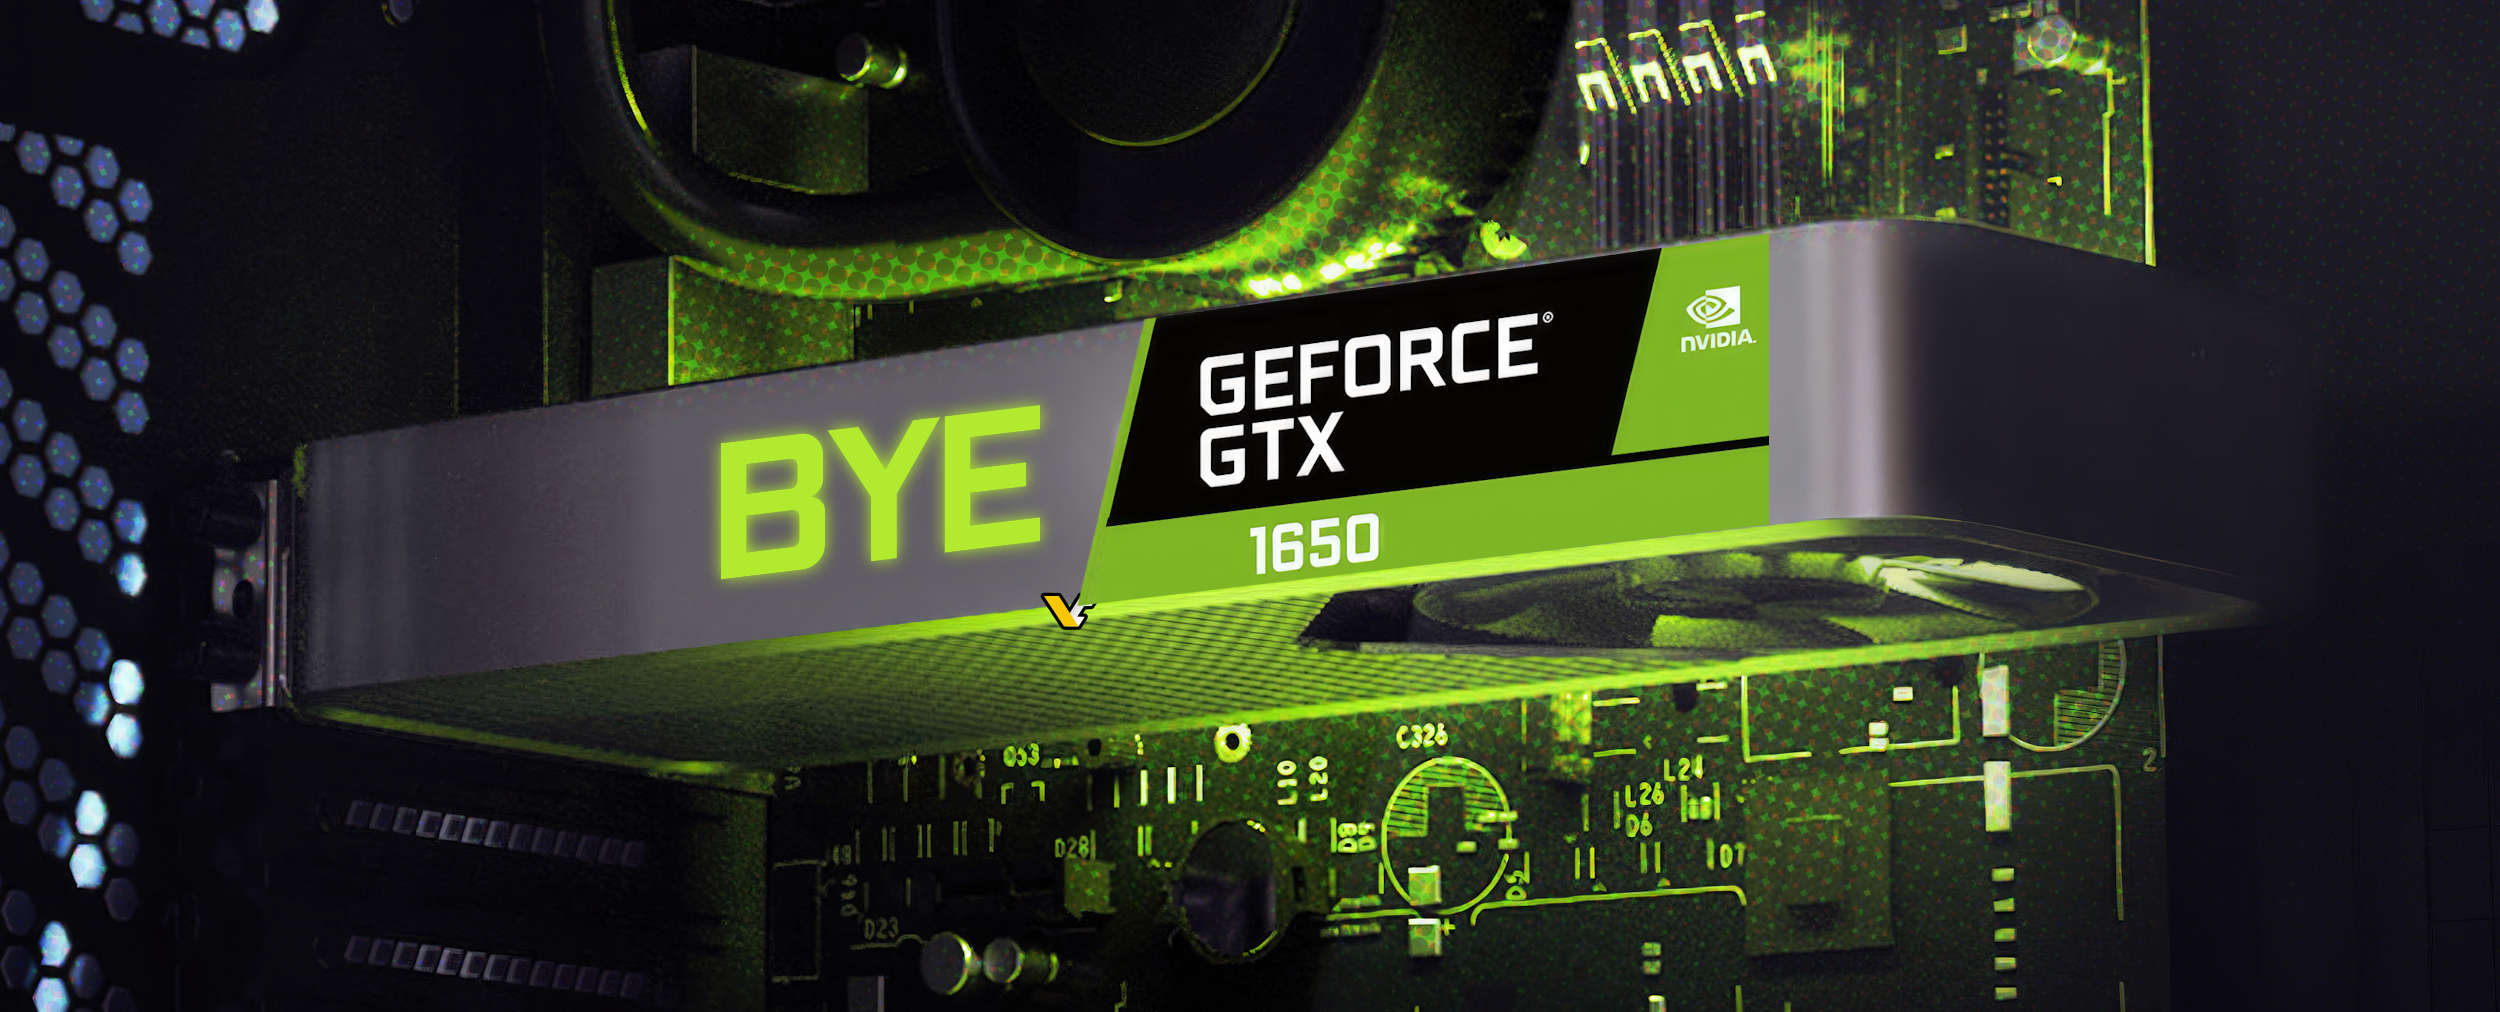 NVIDIA will discontinue all GeForce GTX 16 graphics cards this year